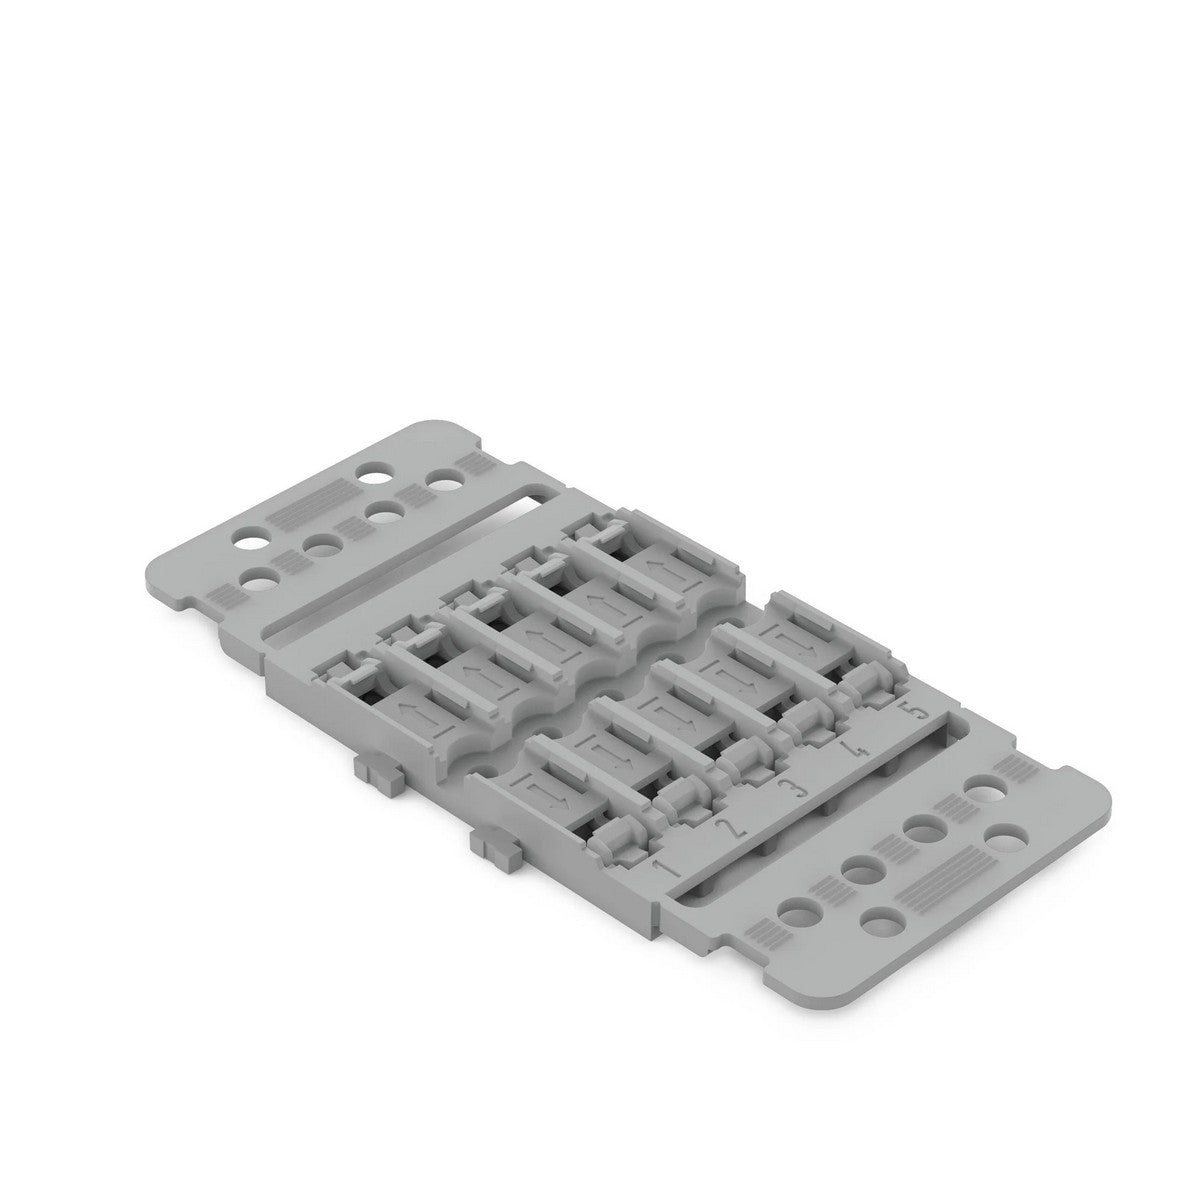 Wago 221 Series Mounting Carrier for Inline Splicing Connector